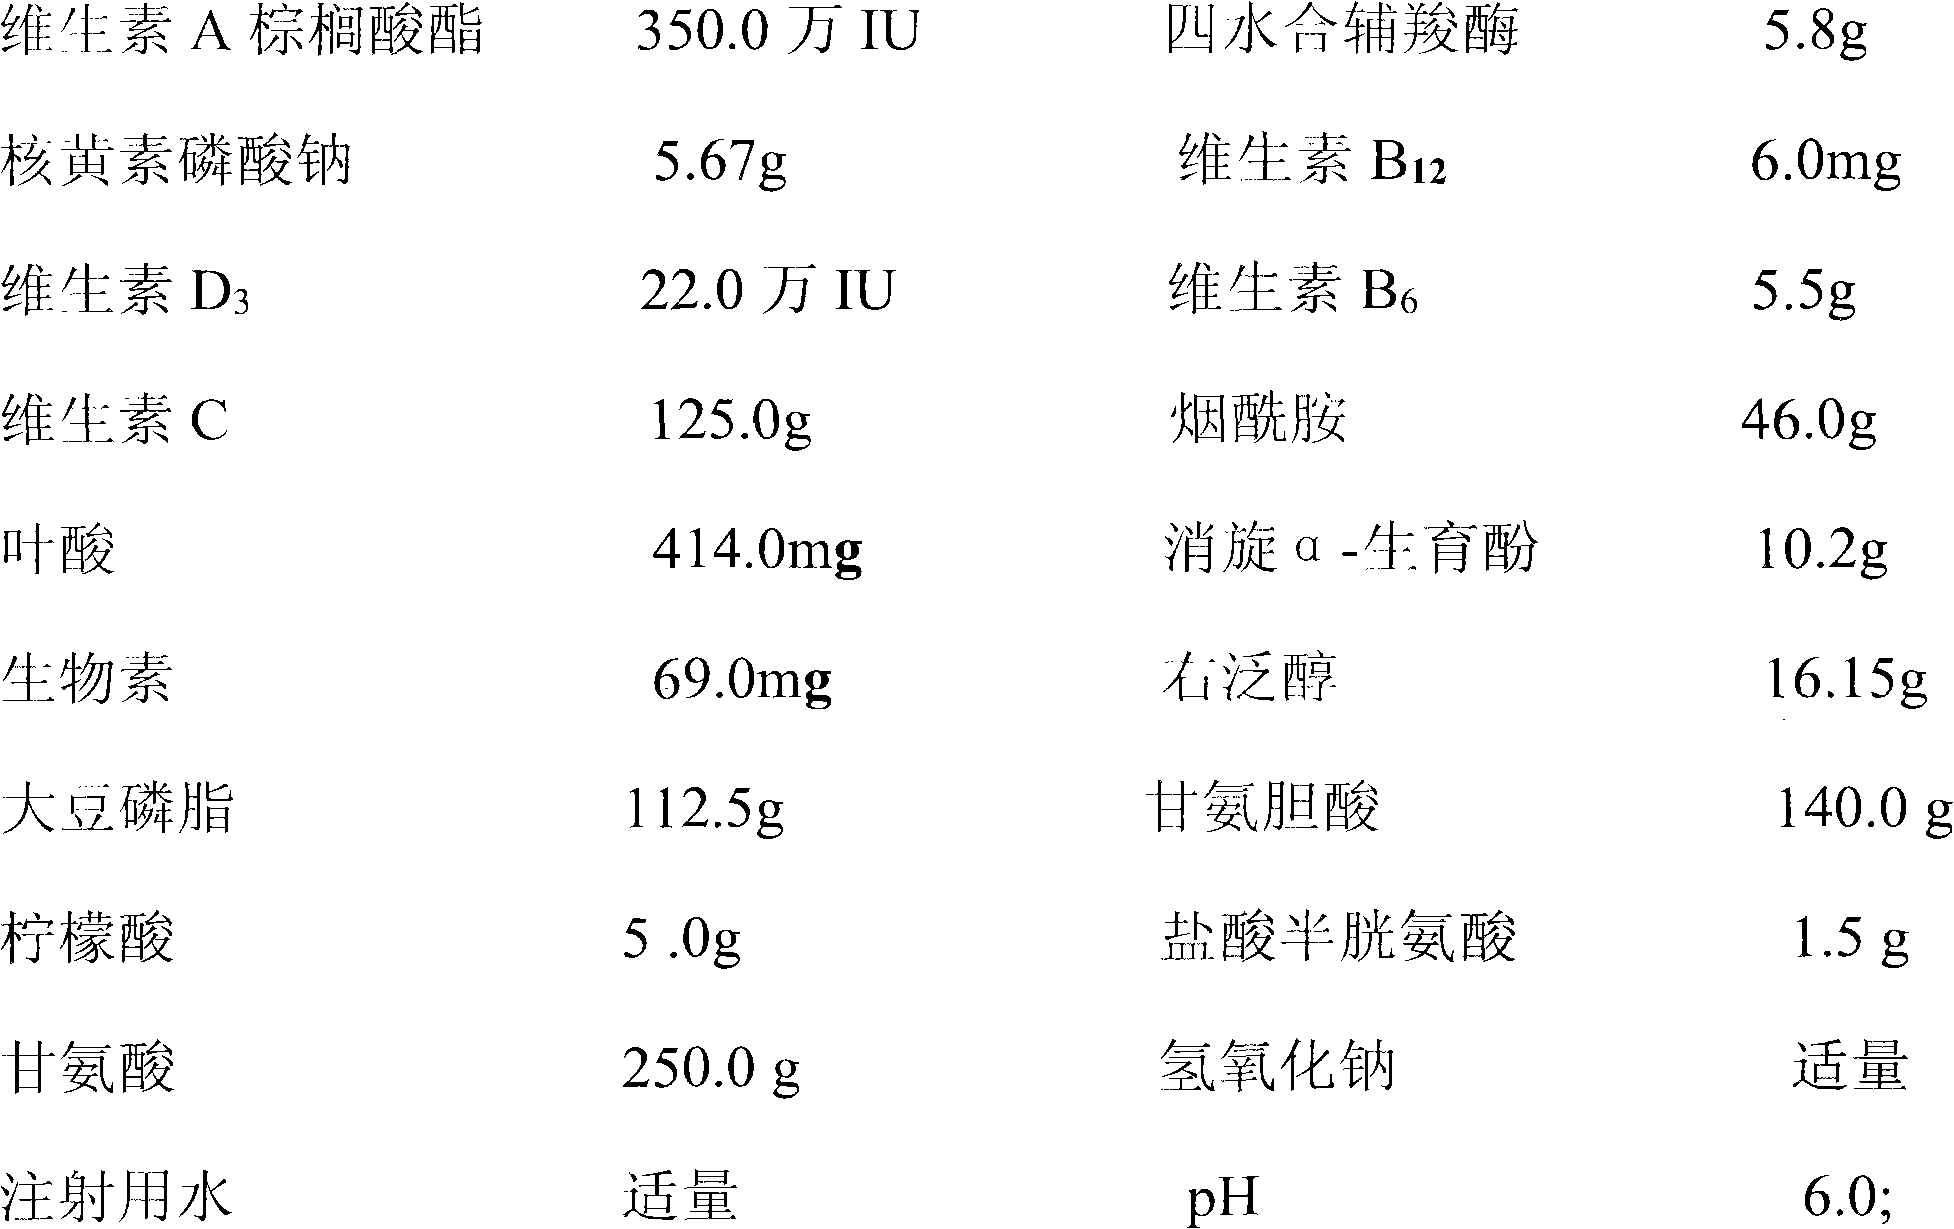 Pharmaceutical composition containing 12 vitamins